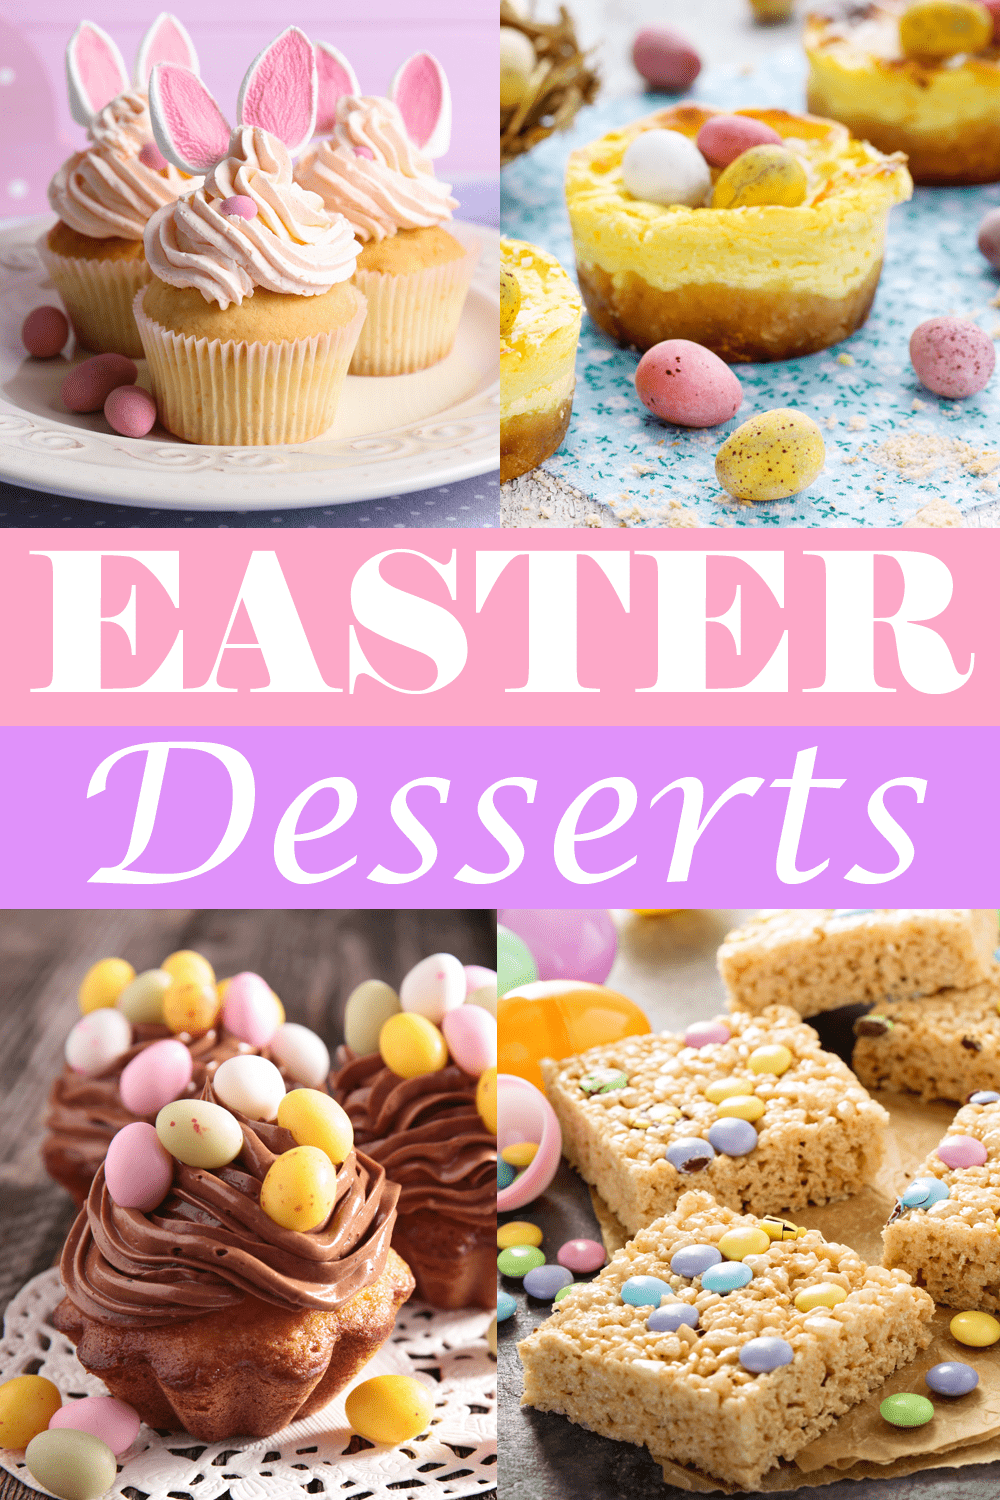 30 Beautiful Easter Desserts (+ Easy Recipes) - Insanely Good